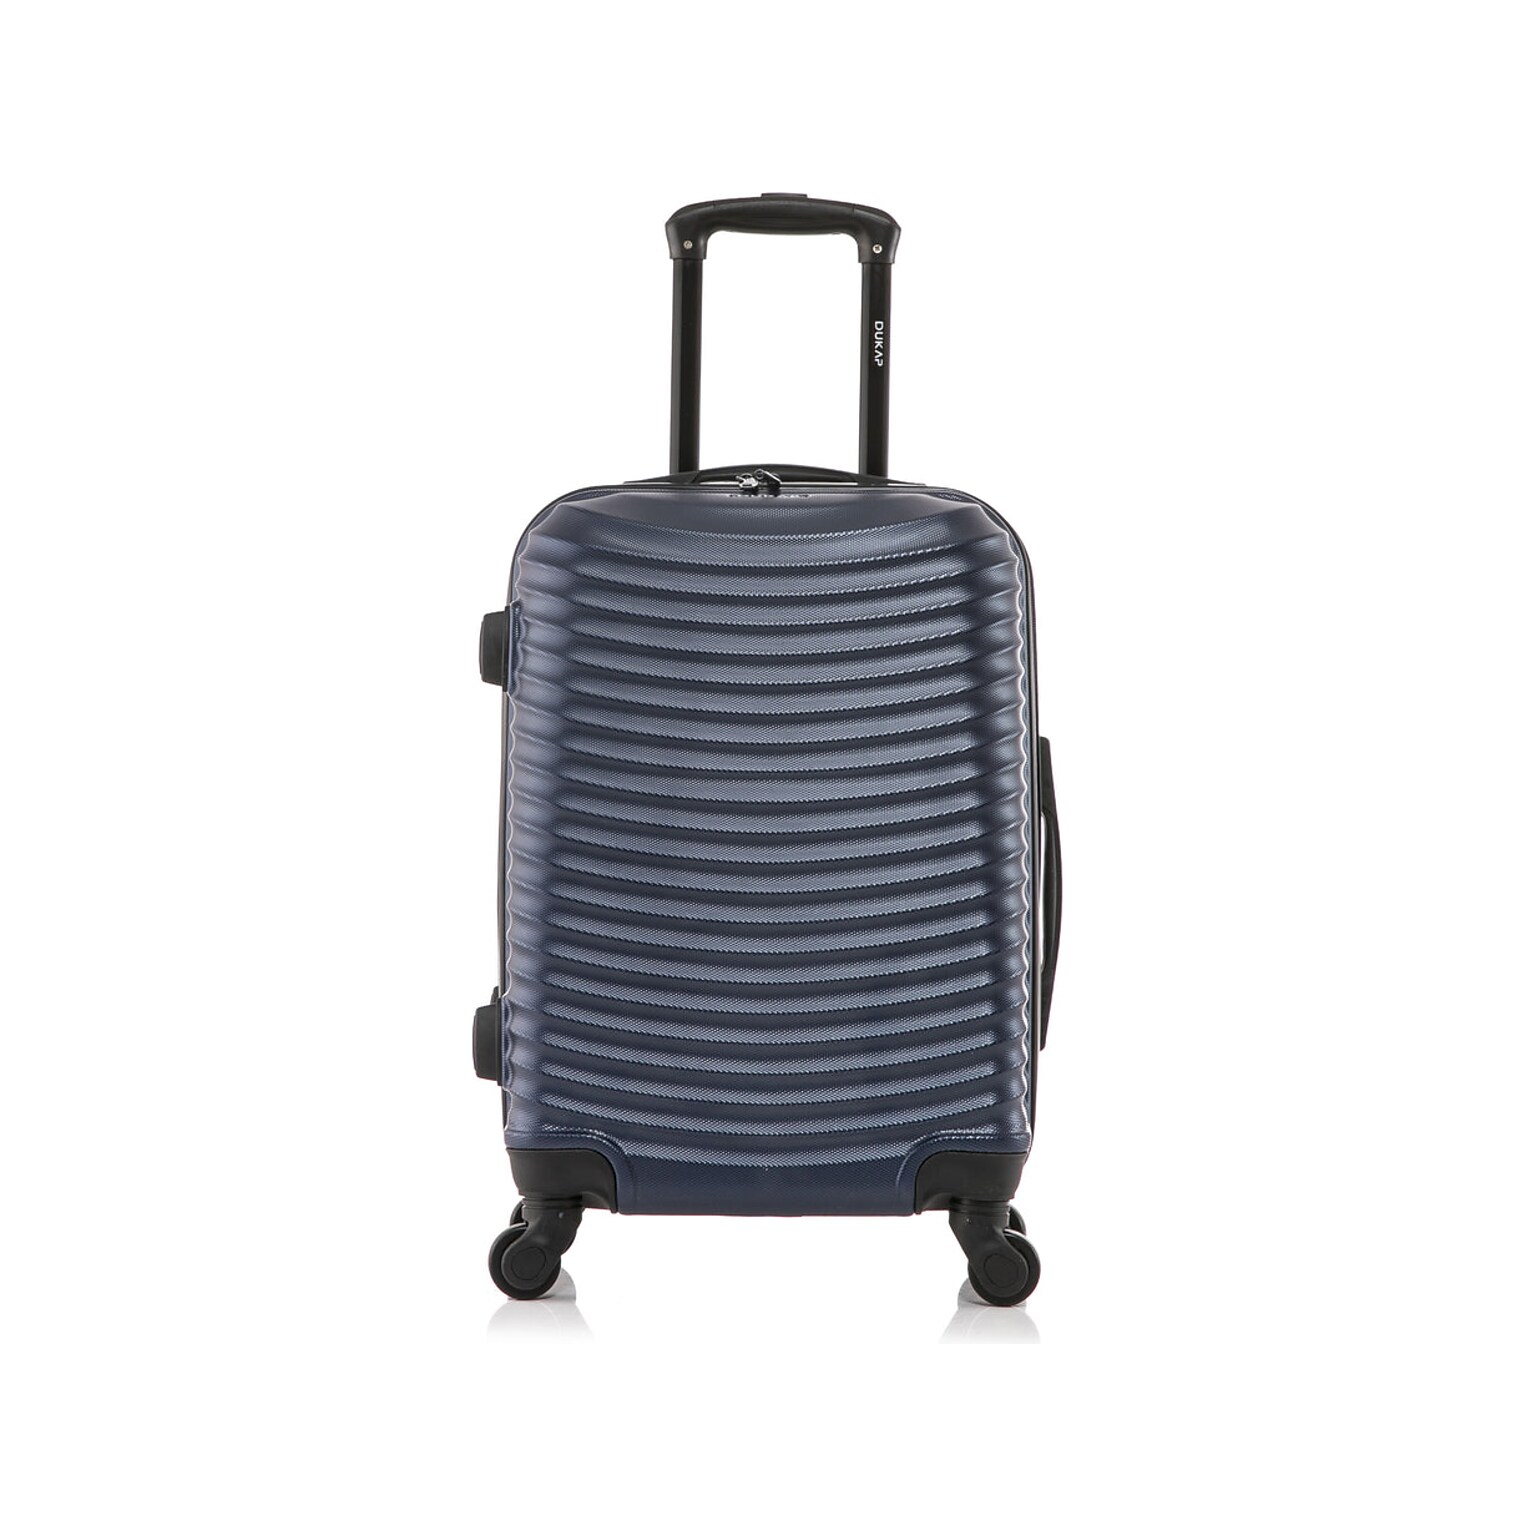 DUKAP ADLY Polycarbonate/ABS Carry-On Suitcase, Navy Blue (DKADL00S-BLU)